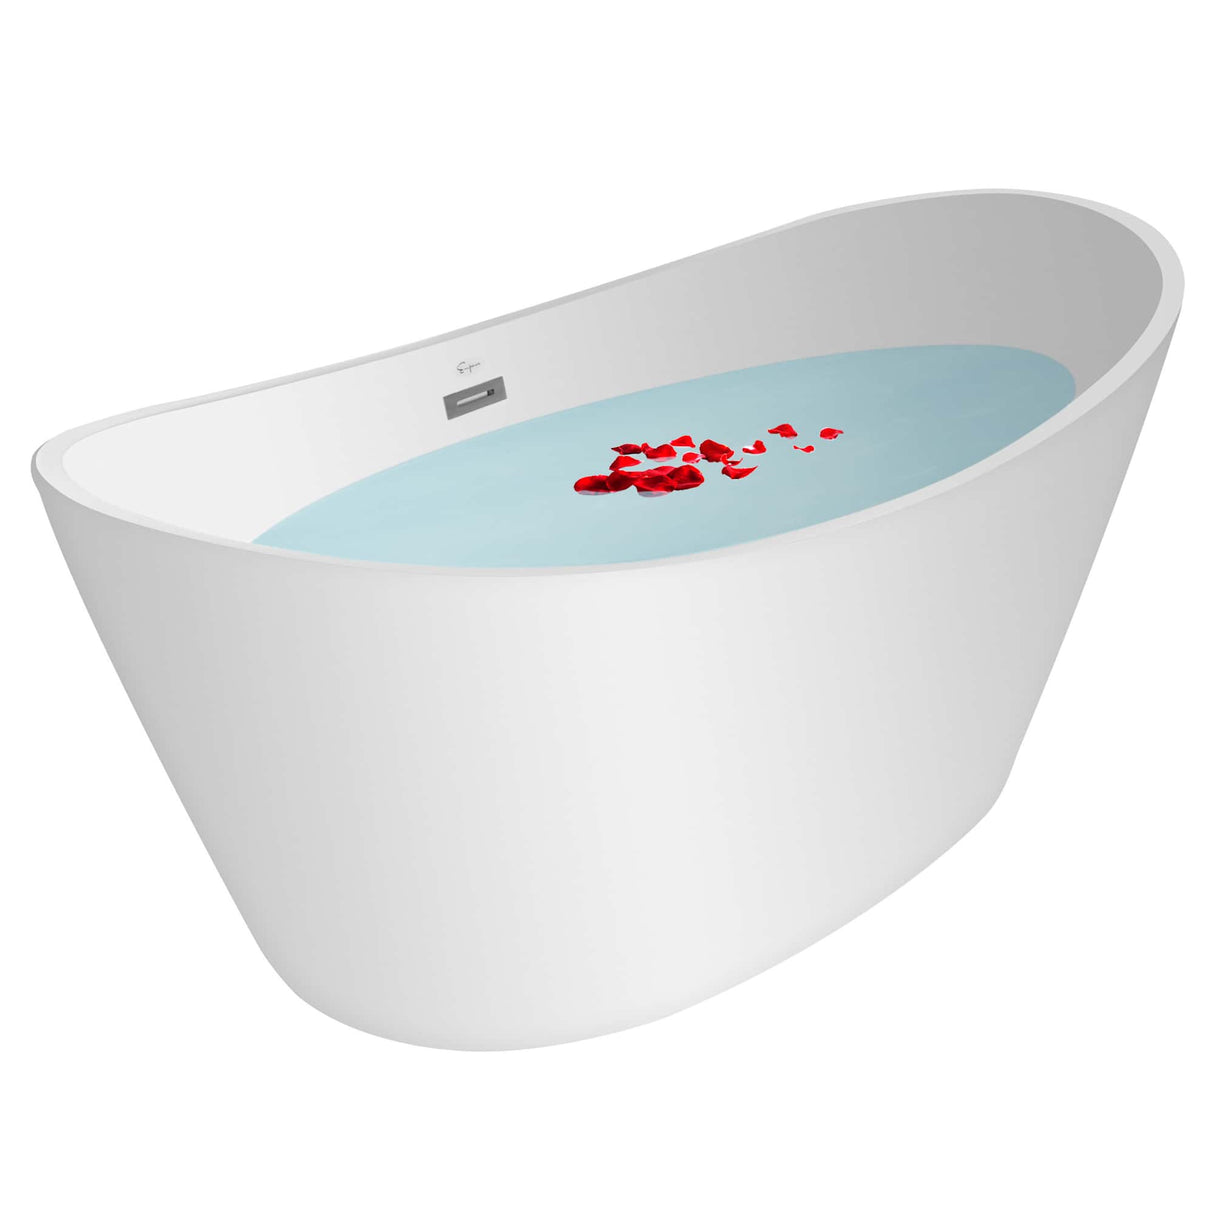 Empava-67FT1518 luxury freestanding acrylic soaking oval modern double-ended bathtub with water and petal